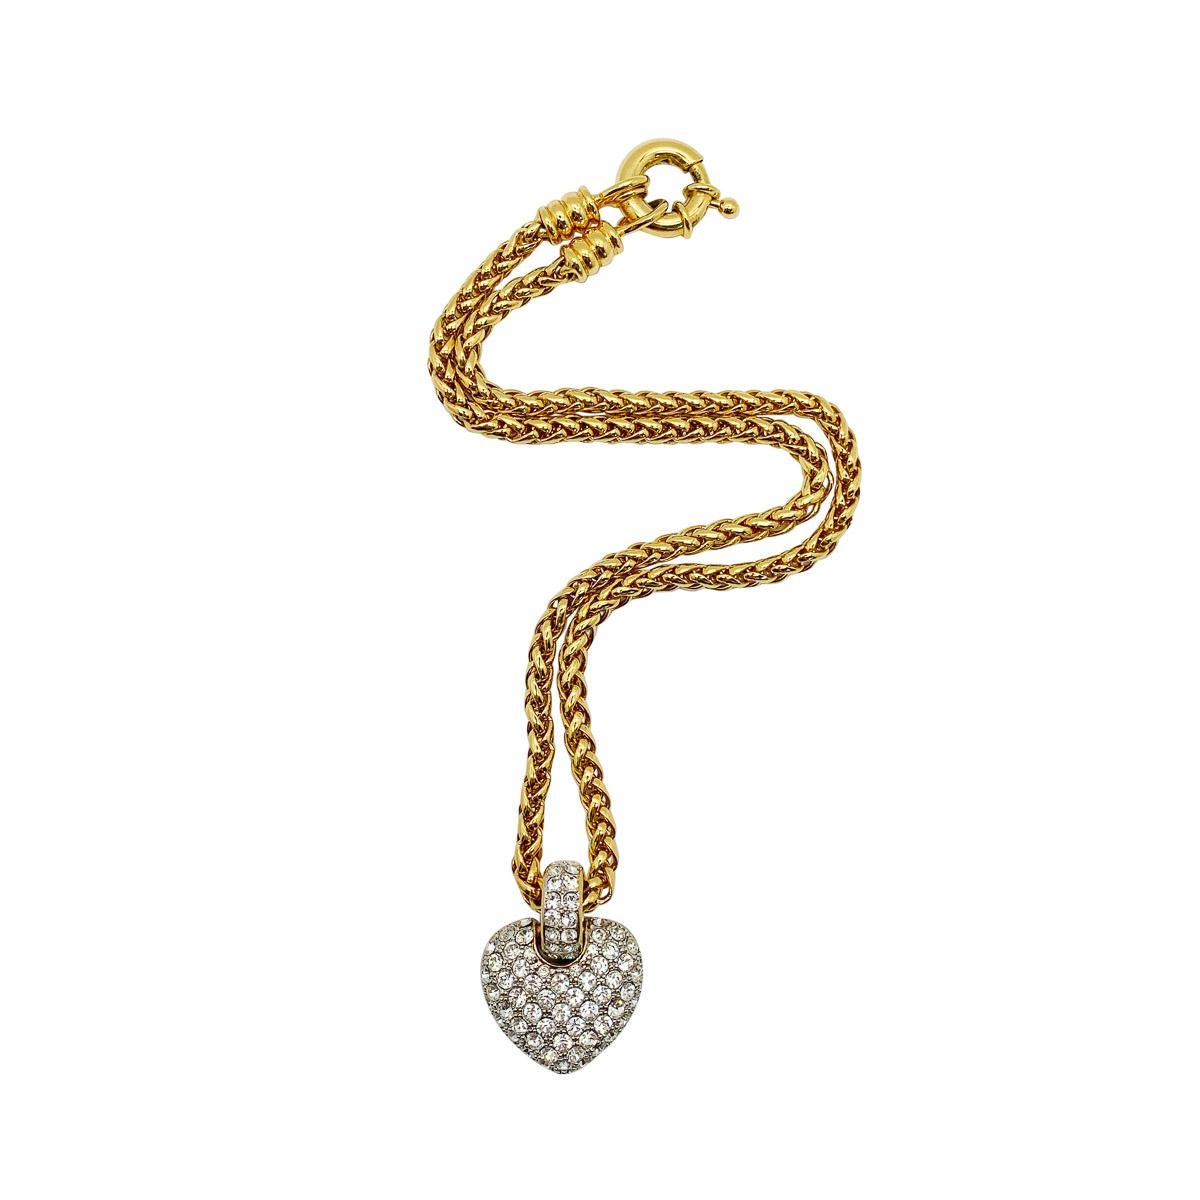 A wonderfully lavish vintage crystal heart necklace. Featuring a chunky wheat link chain with feature bolt ring leading to a large pave crystal heart with matching chunky bale.

Vintage Condition: Very good without damage or noteworthy